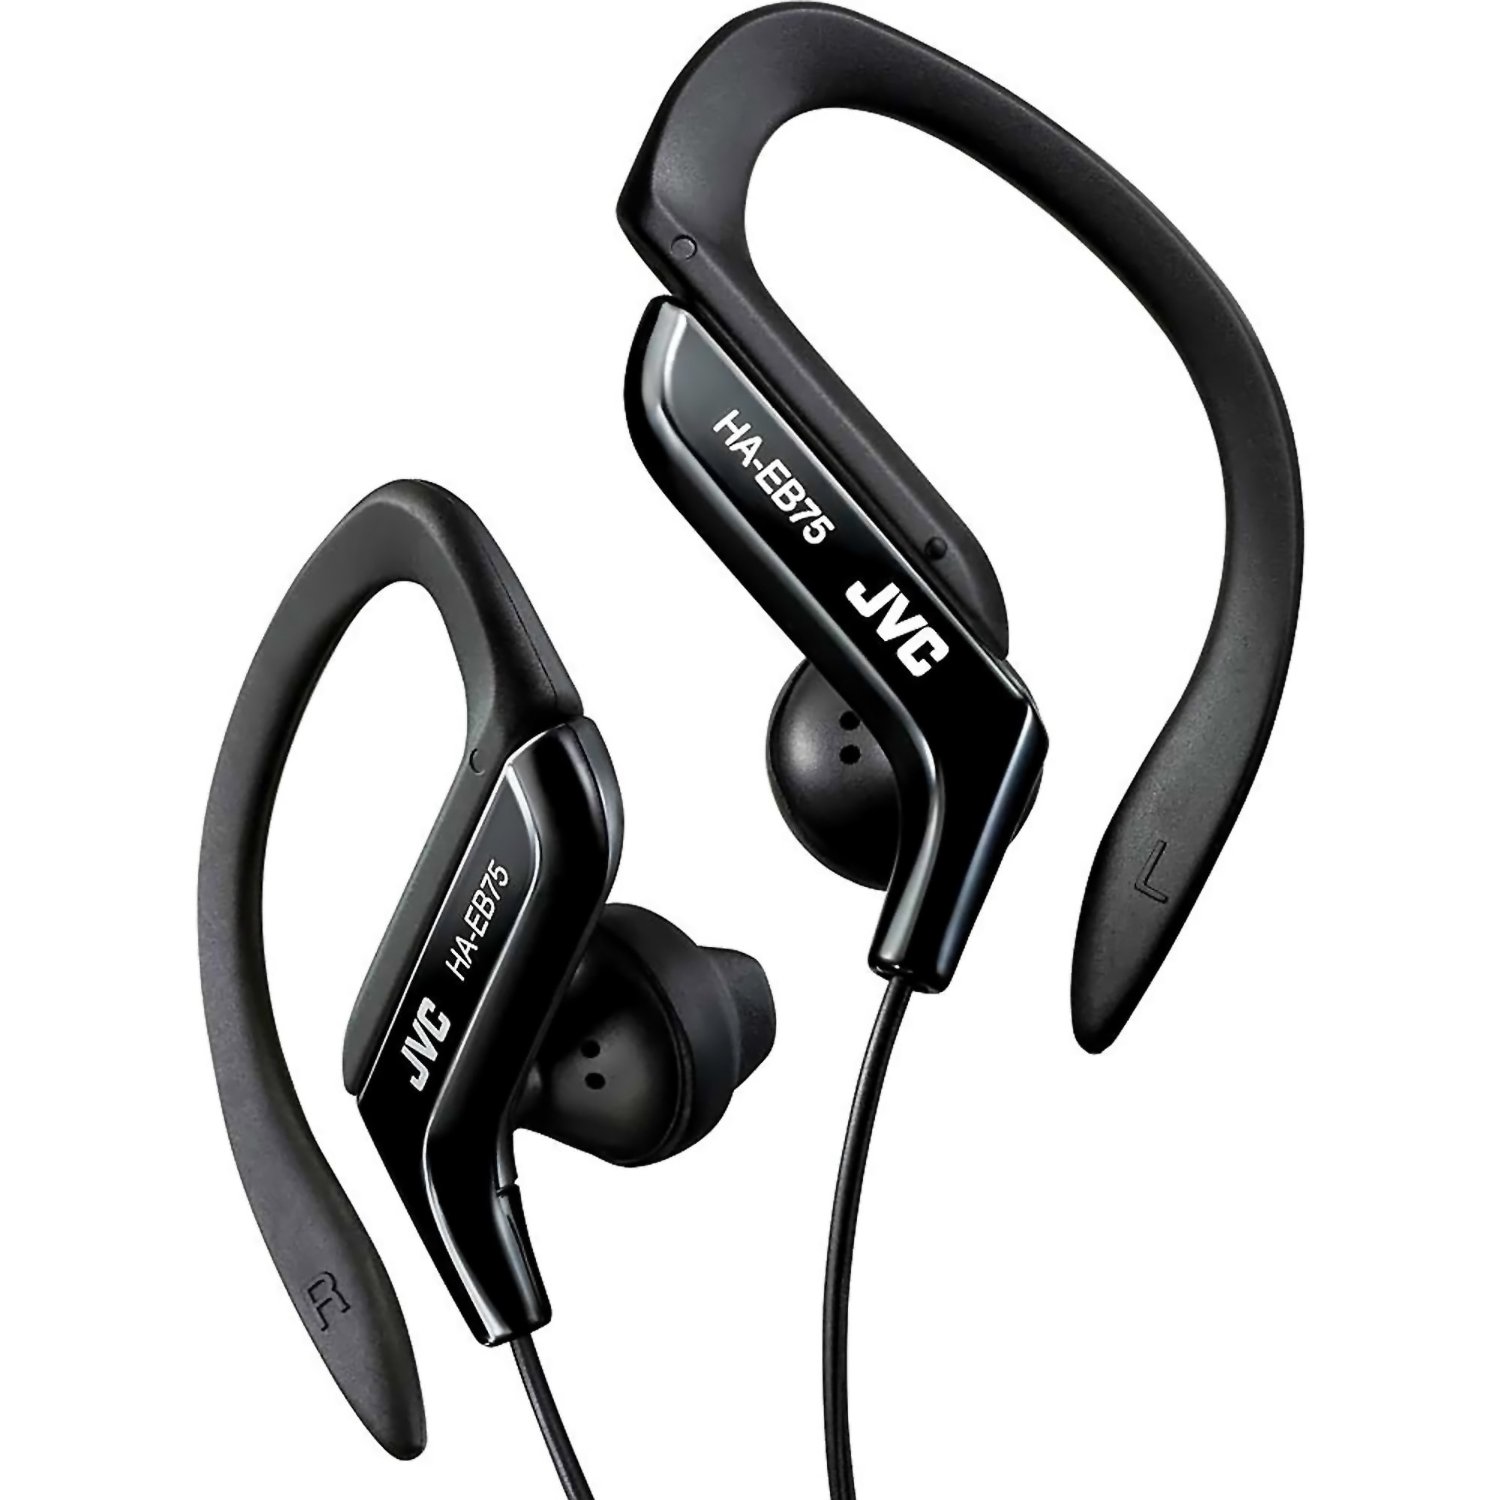 Top 10 Best Sports Headphones in 2022 Reviews Journey With Music On